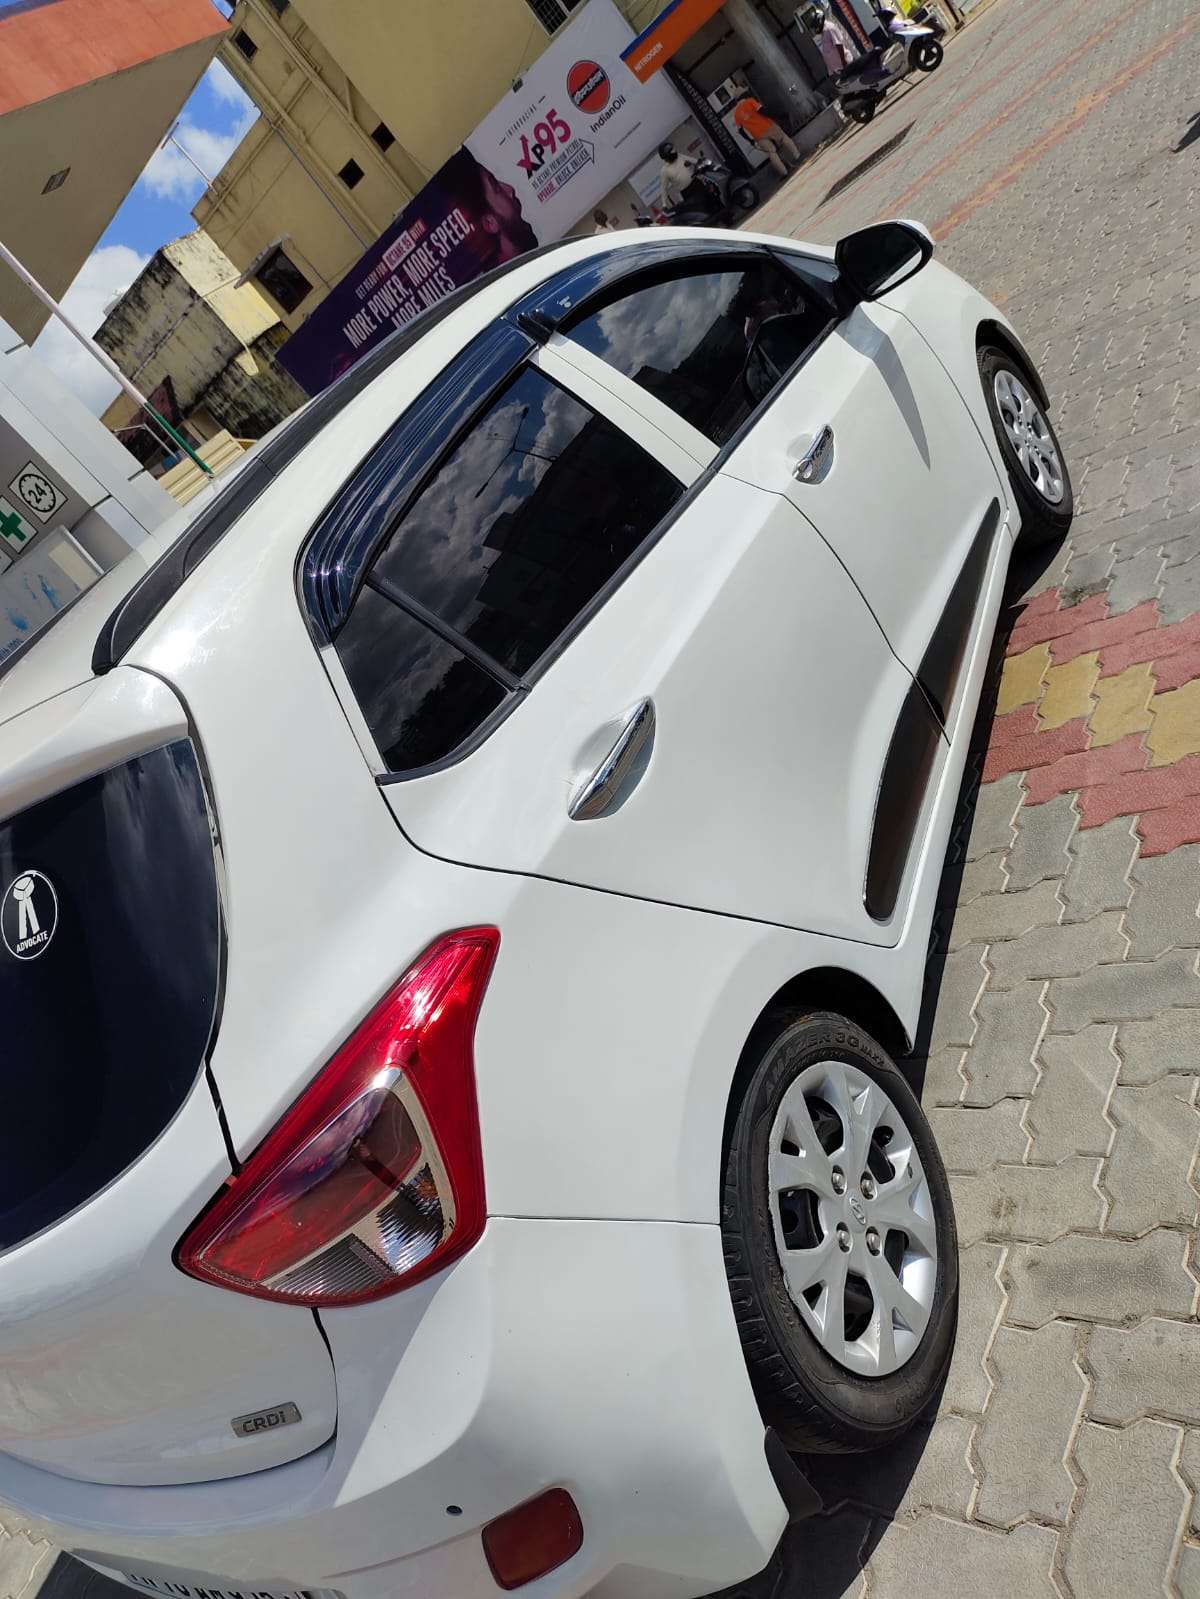 1582-for-sale-Hyundai-Grand-i10-Diesel-Second-Owner-2013-TN-registered-rs-350000